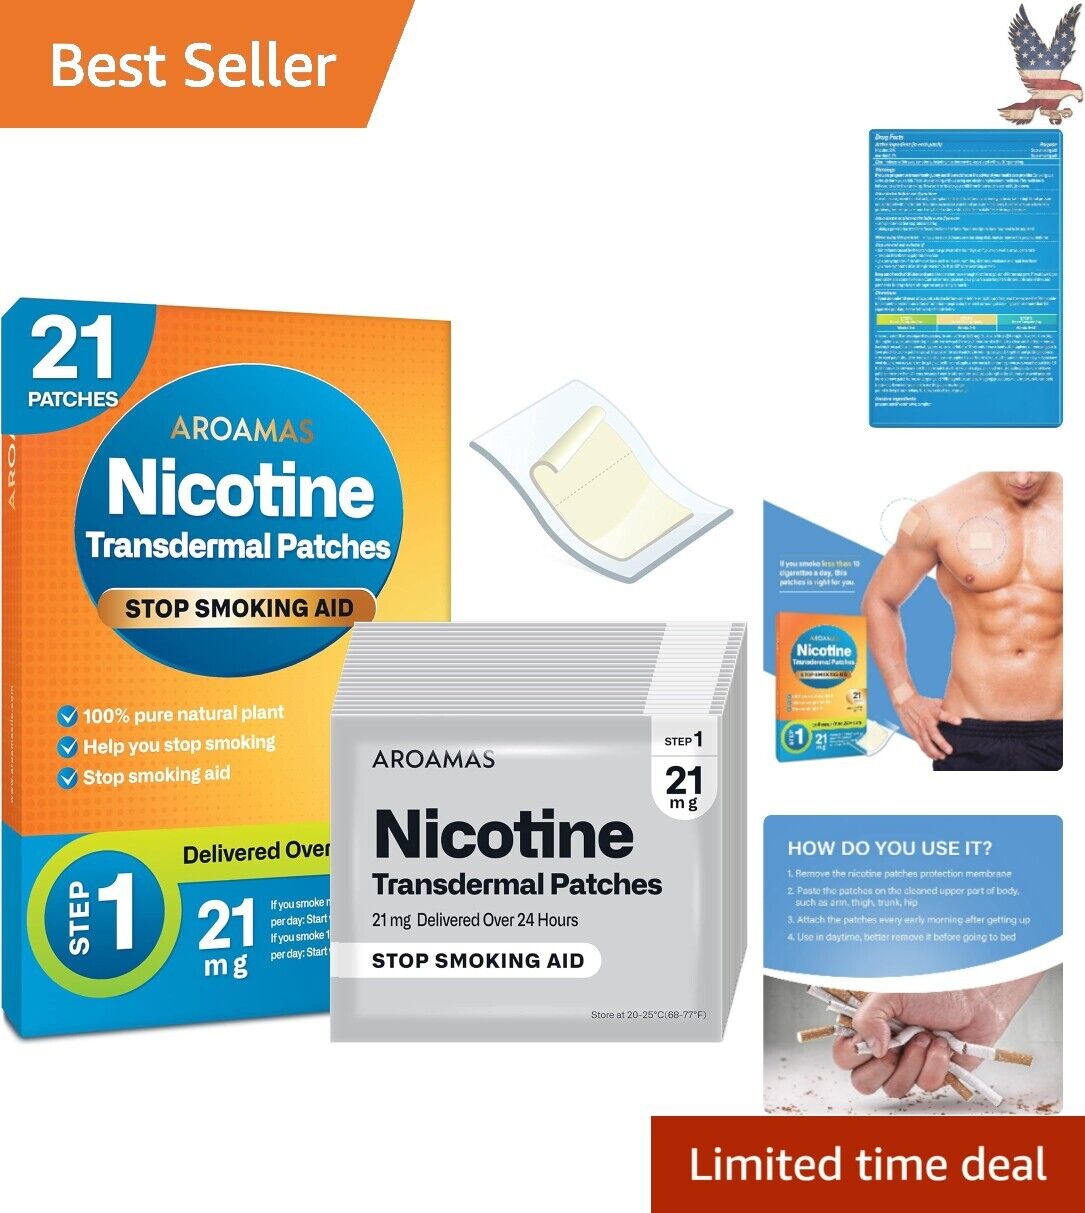 Nicotine Patches 24 Hour Delivery Natural Ingredients Quality 21mg - Step 1